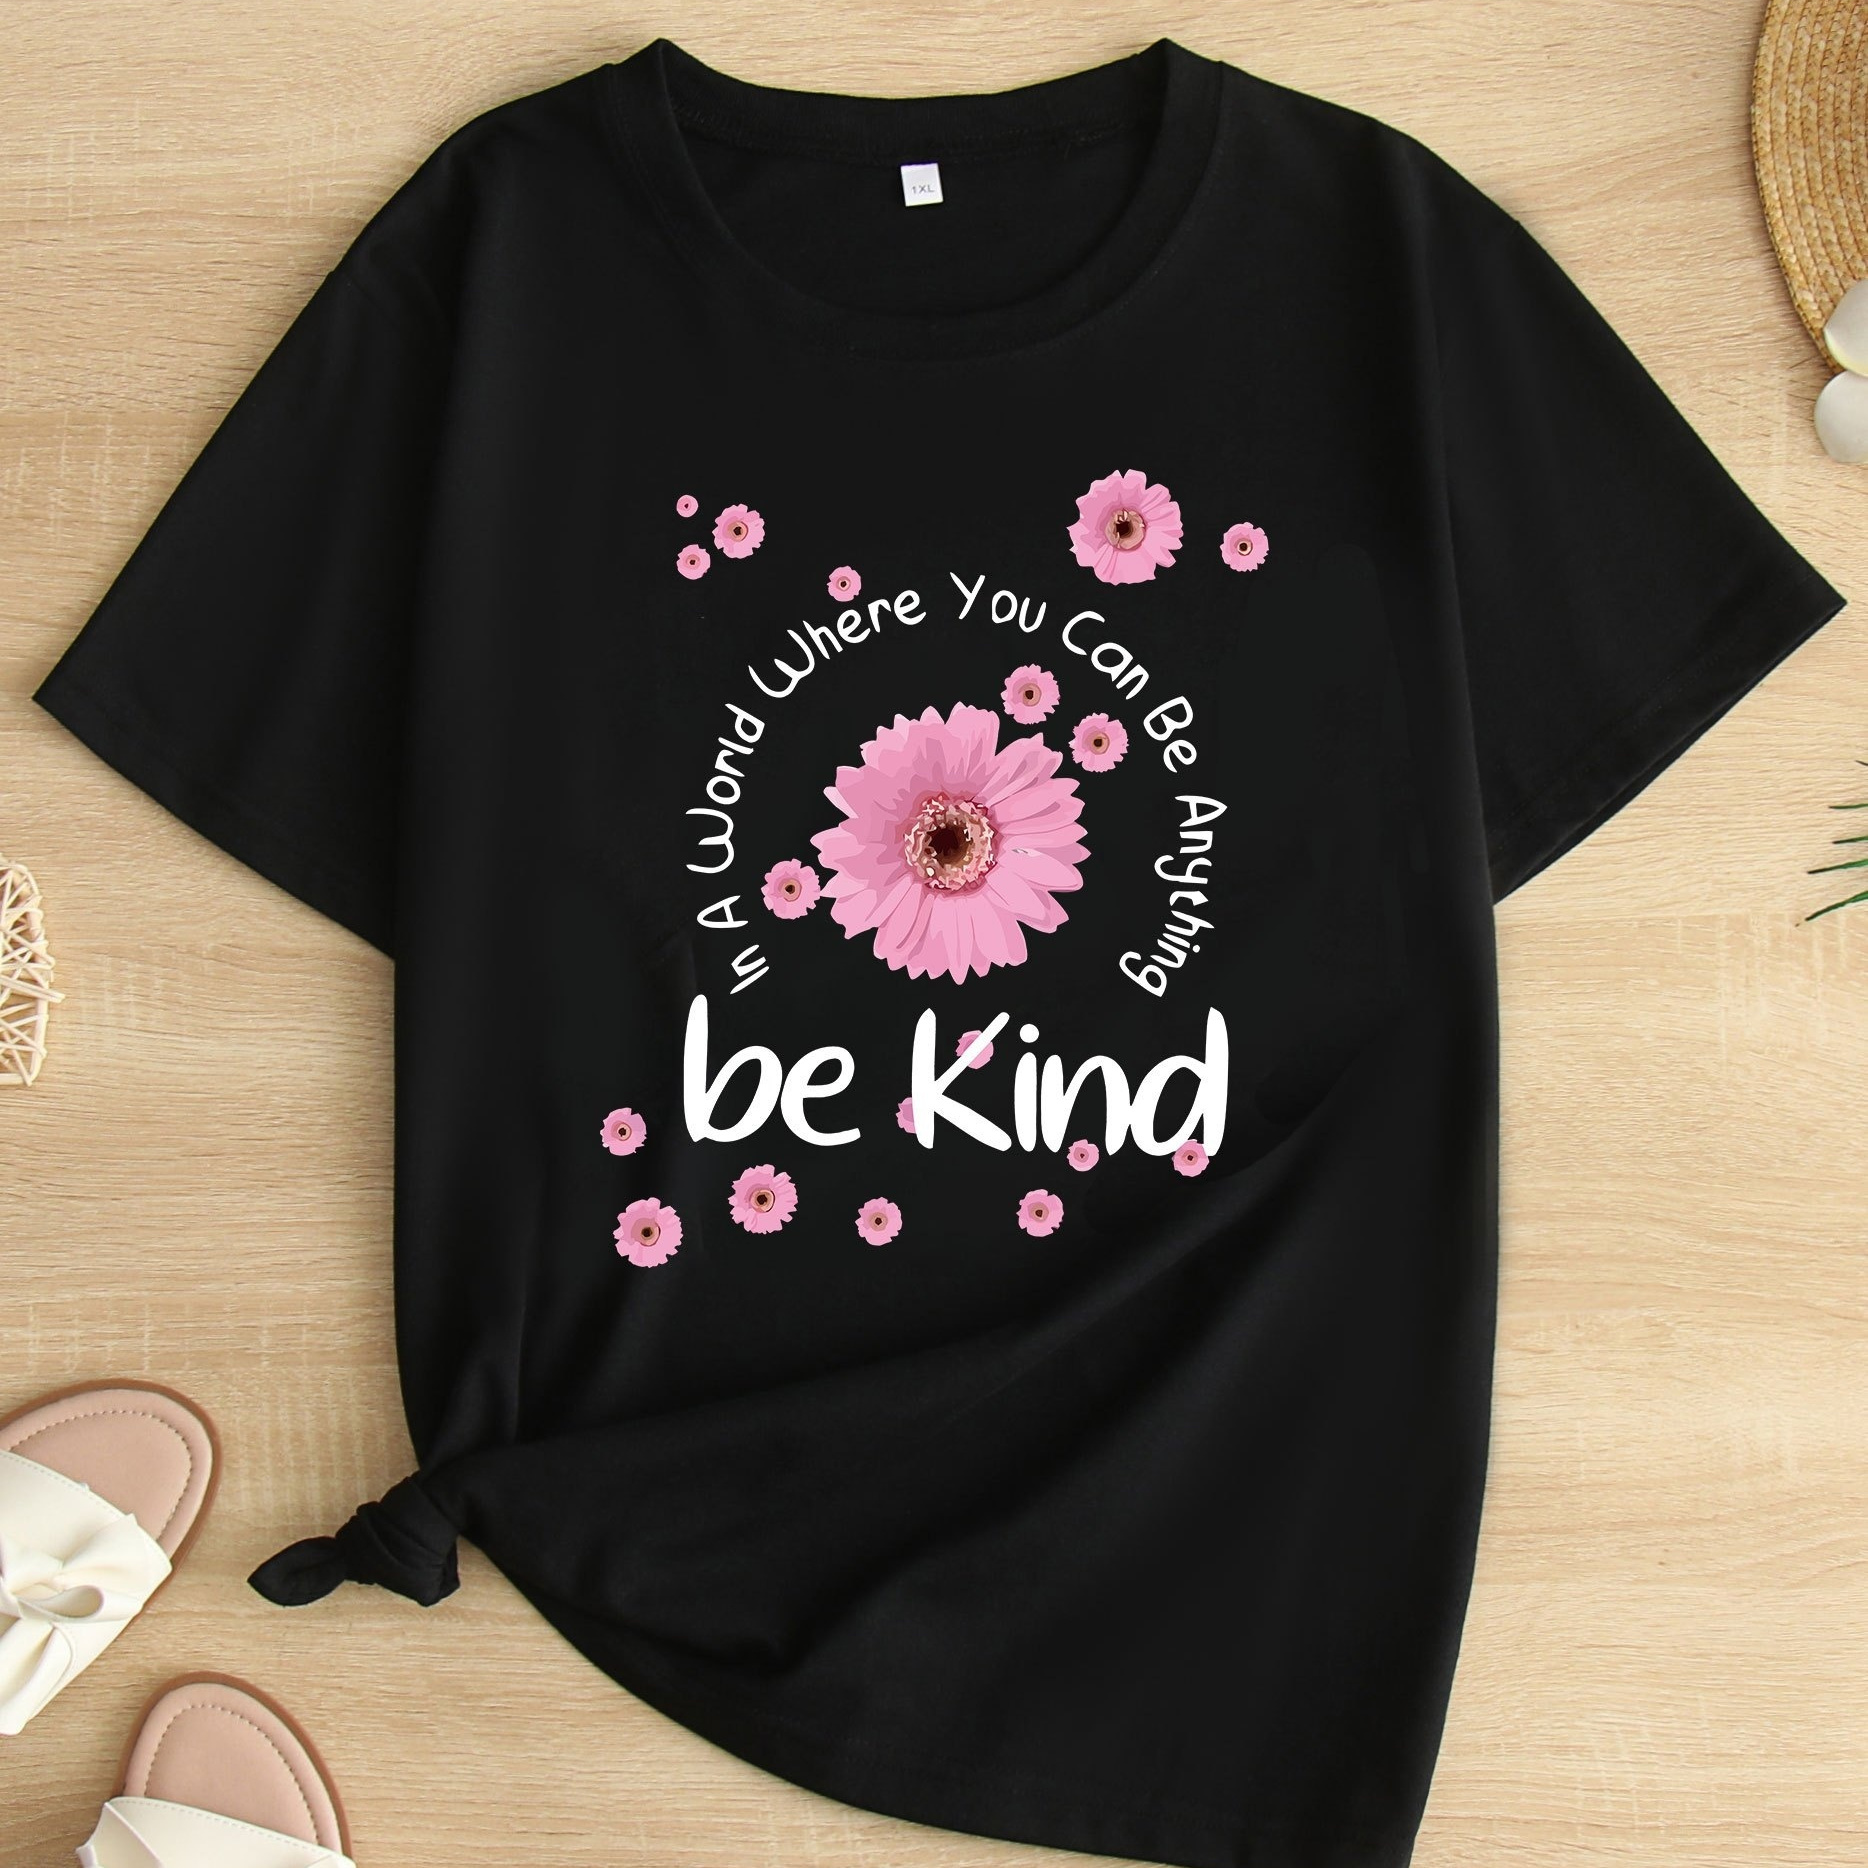 

Plus Size Be Kind Letter Print T-shirt, Casual Short Sleeve Crew Neck Top For Spring & Summer, Women's Plus Size Clothing